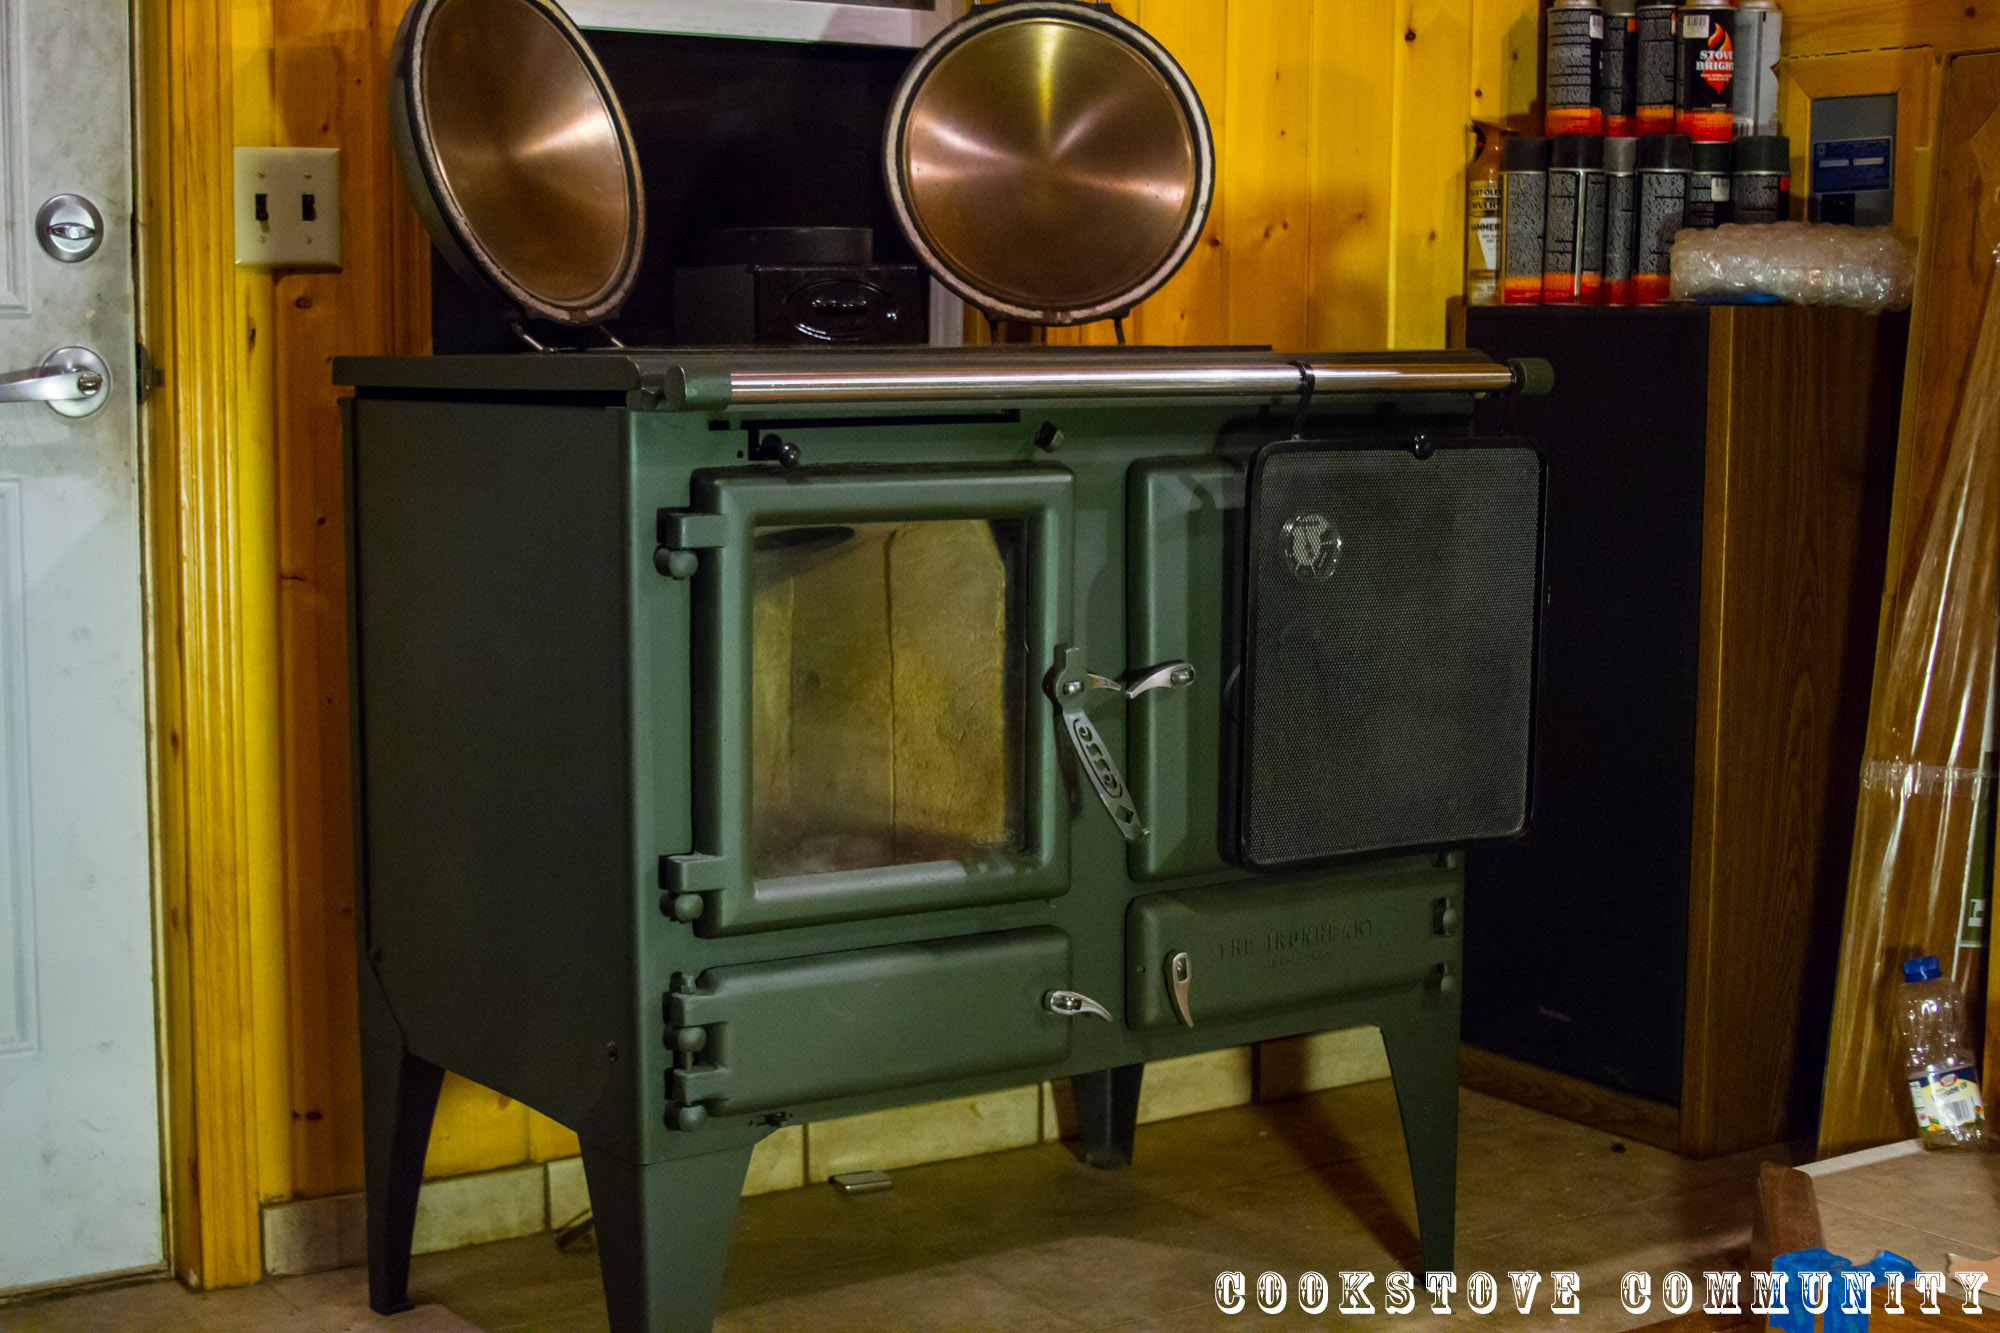 What is the Best Wood Cook Stove? 